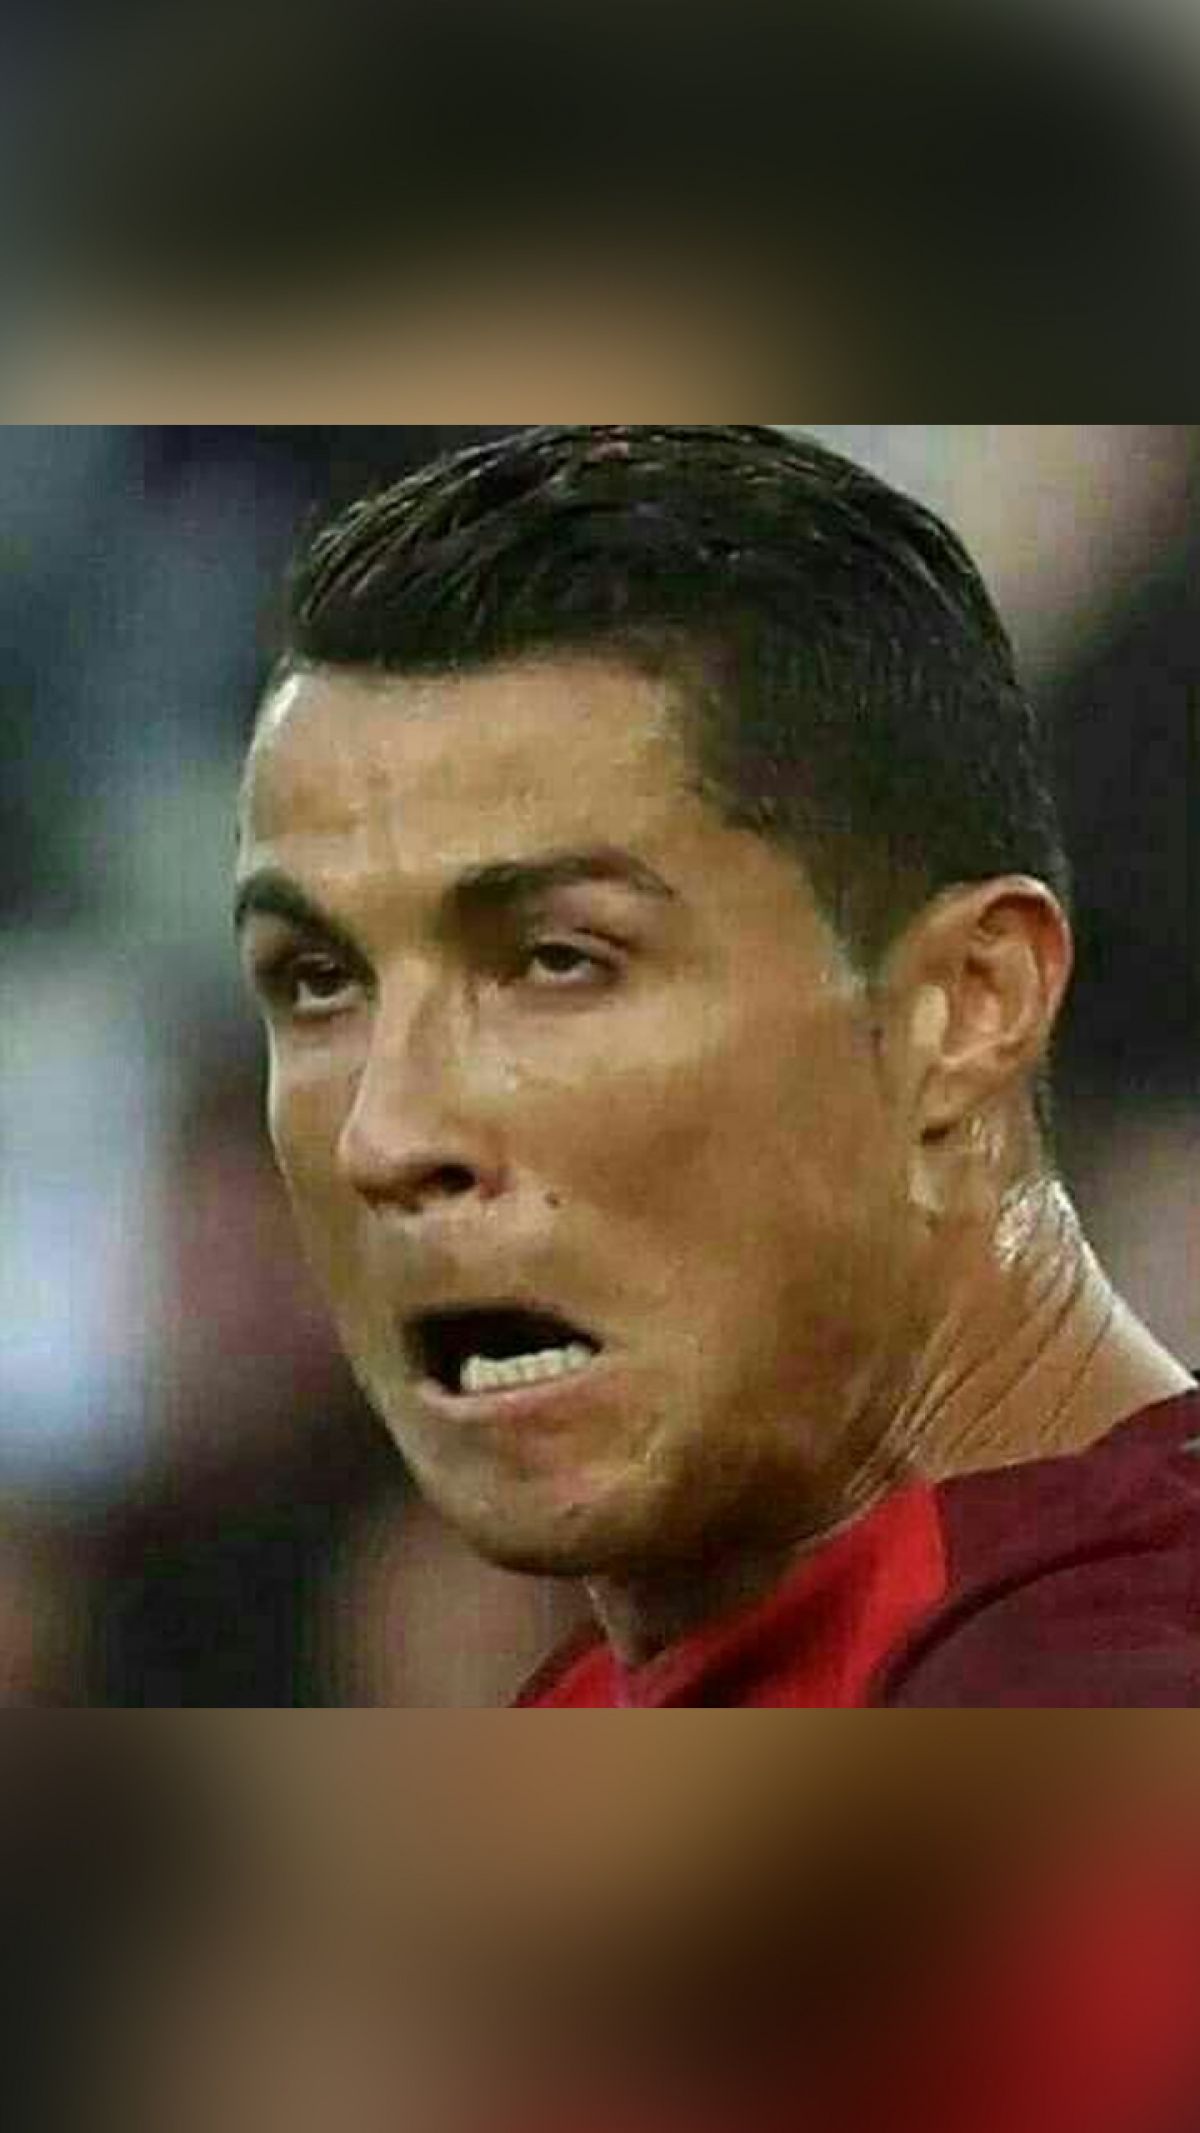 You will be enthralled seeing these funny pictures of Cristiano Ronaldo